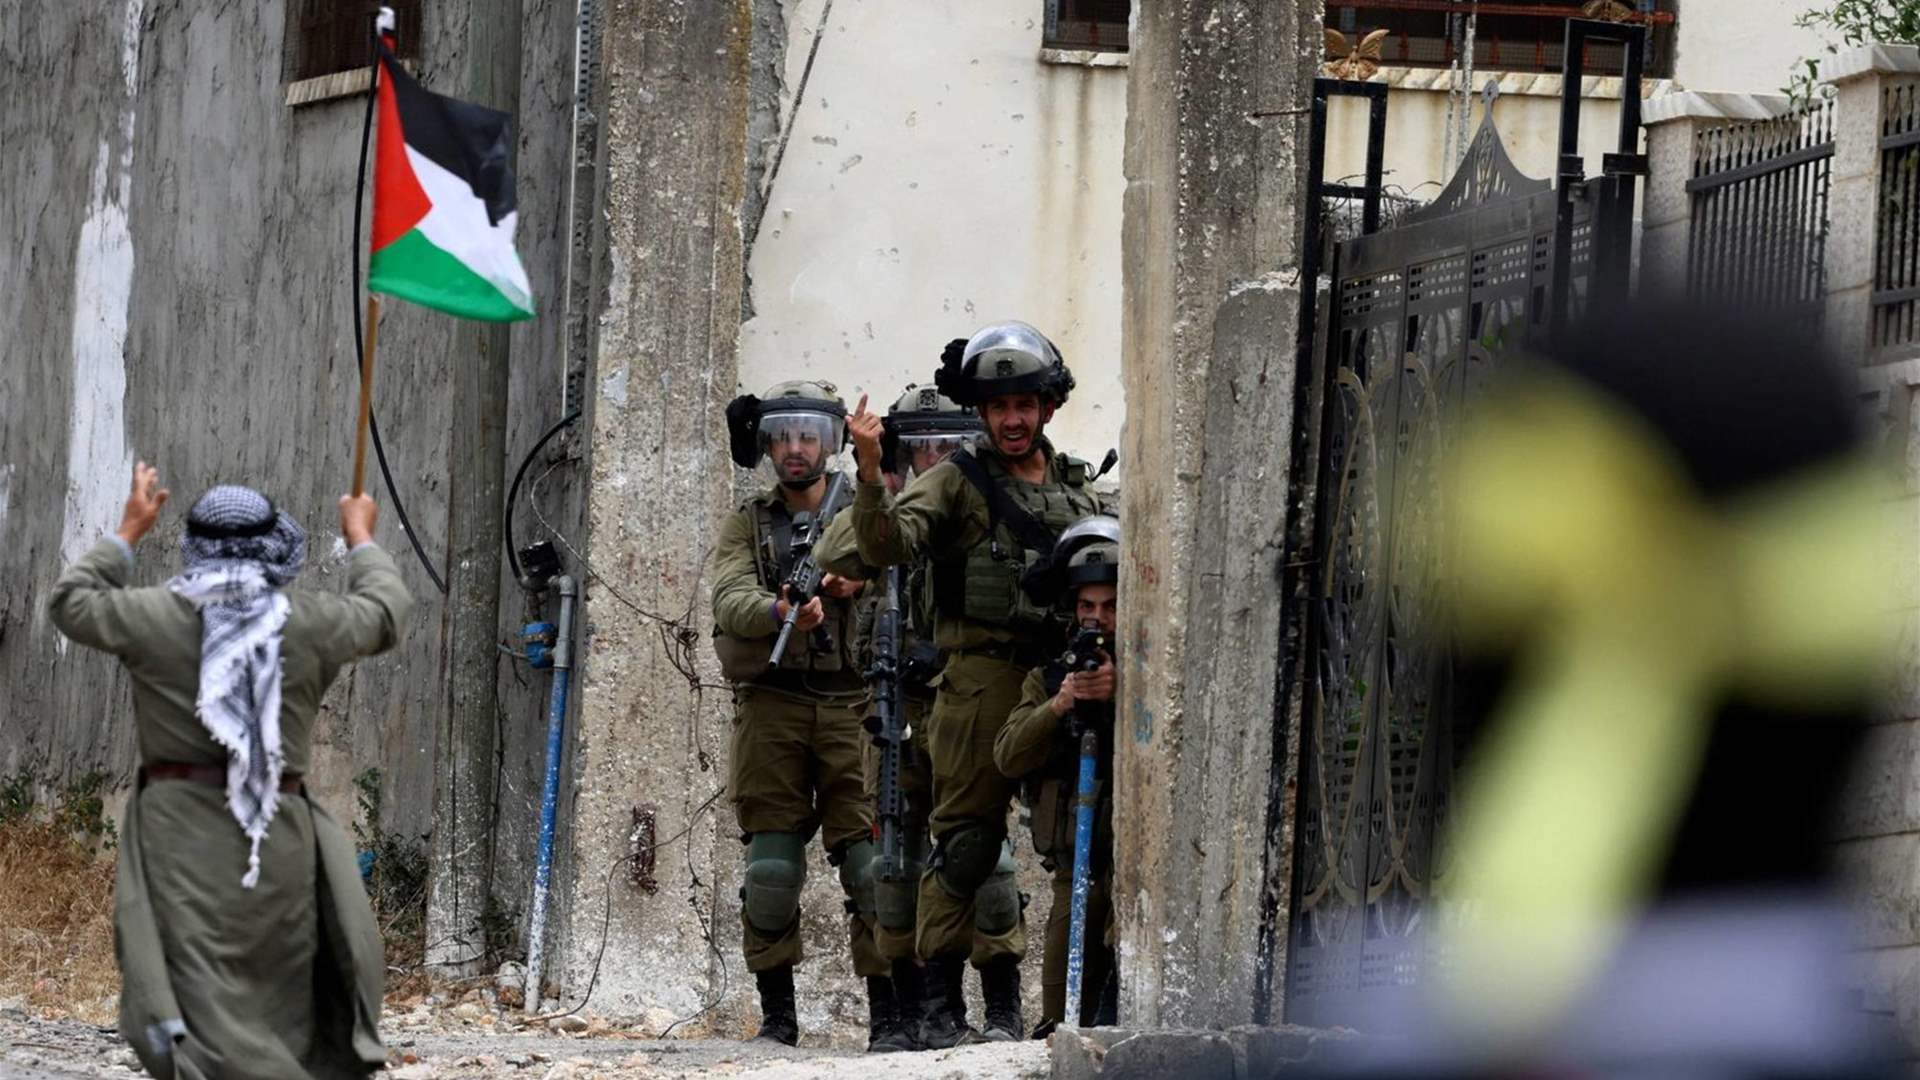 Four Palestinians killed in Israeli army incursion in Jenin, West Bank 